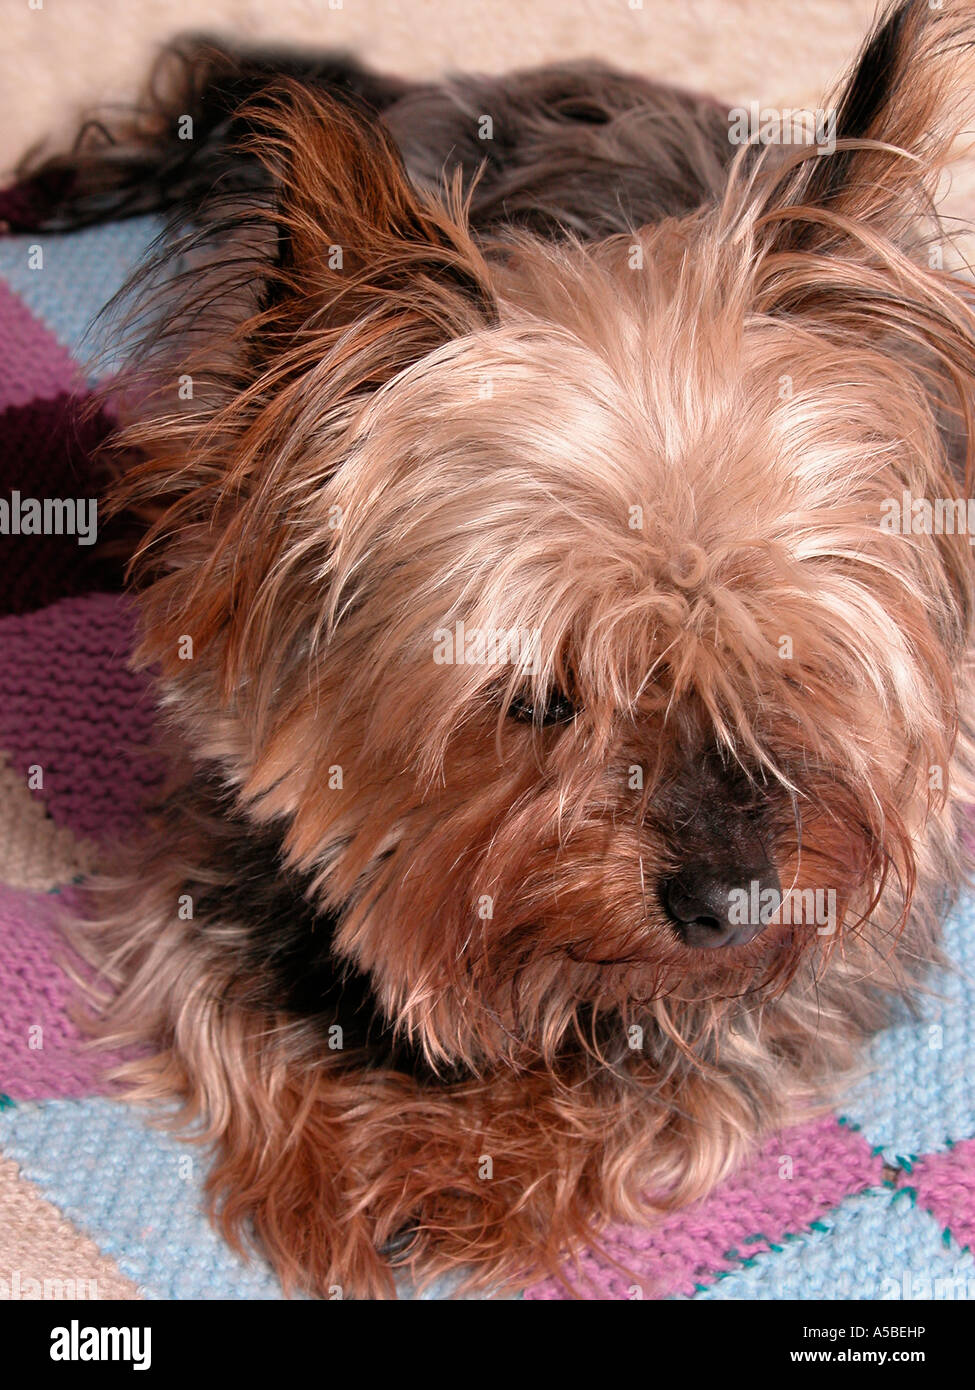 Yorkshire terrier looking cute laying on rugs Stock Photo